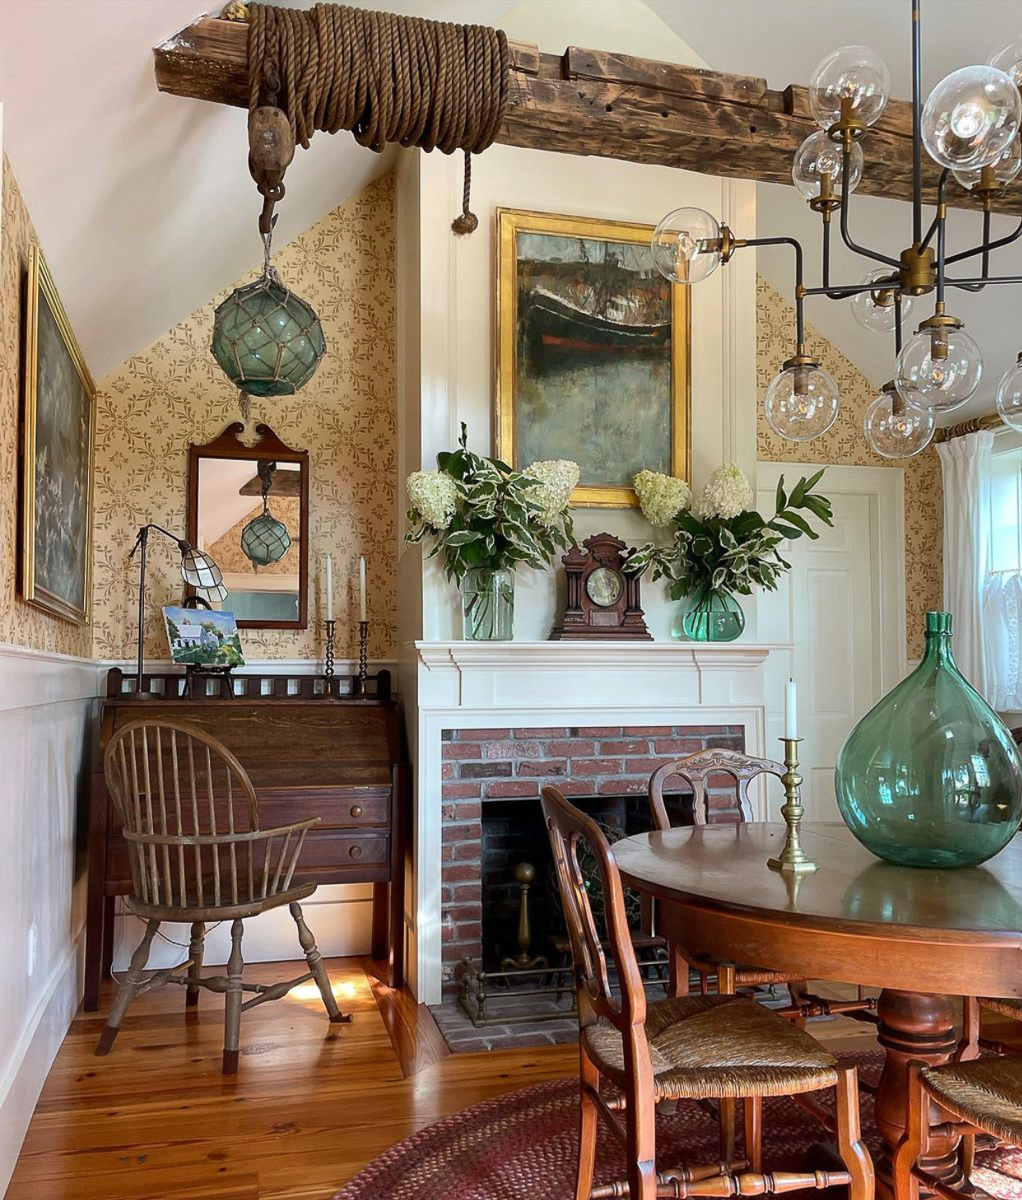 Eclectic Home Tour – The Groggy Anchor